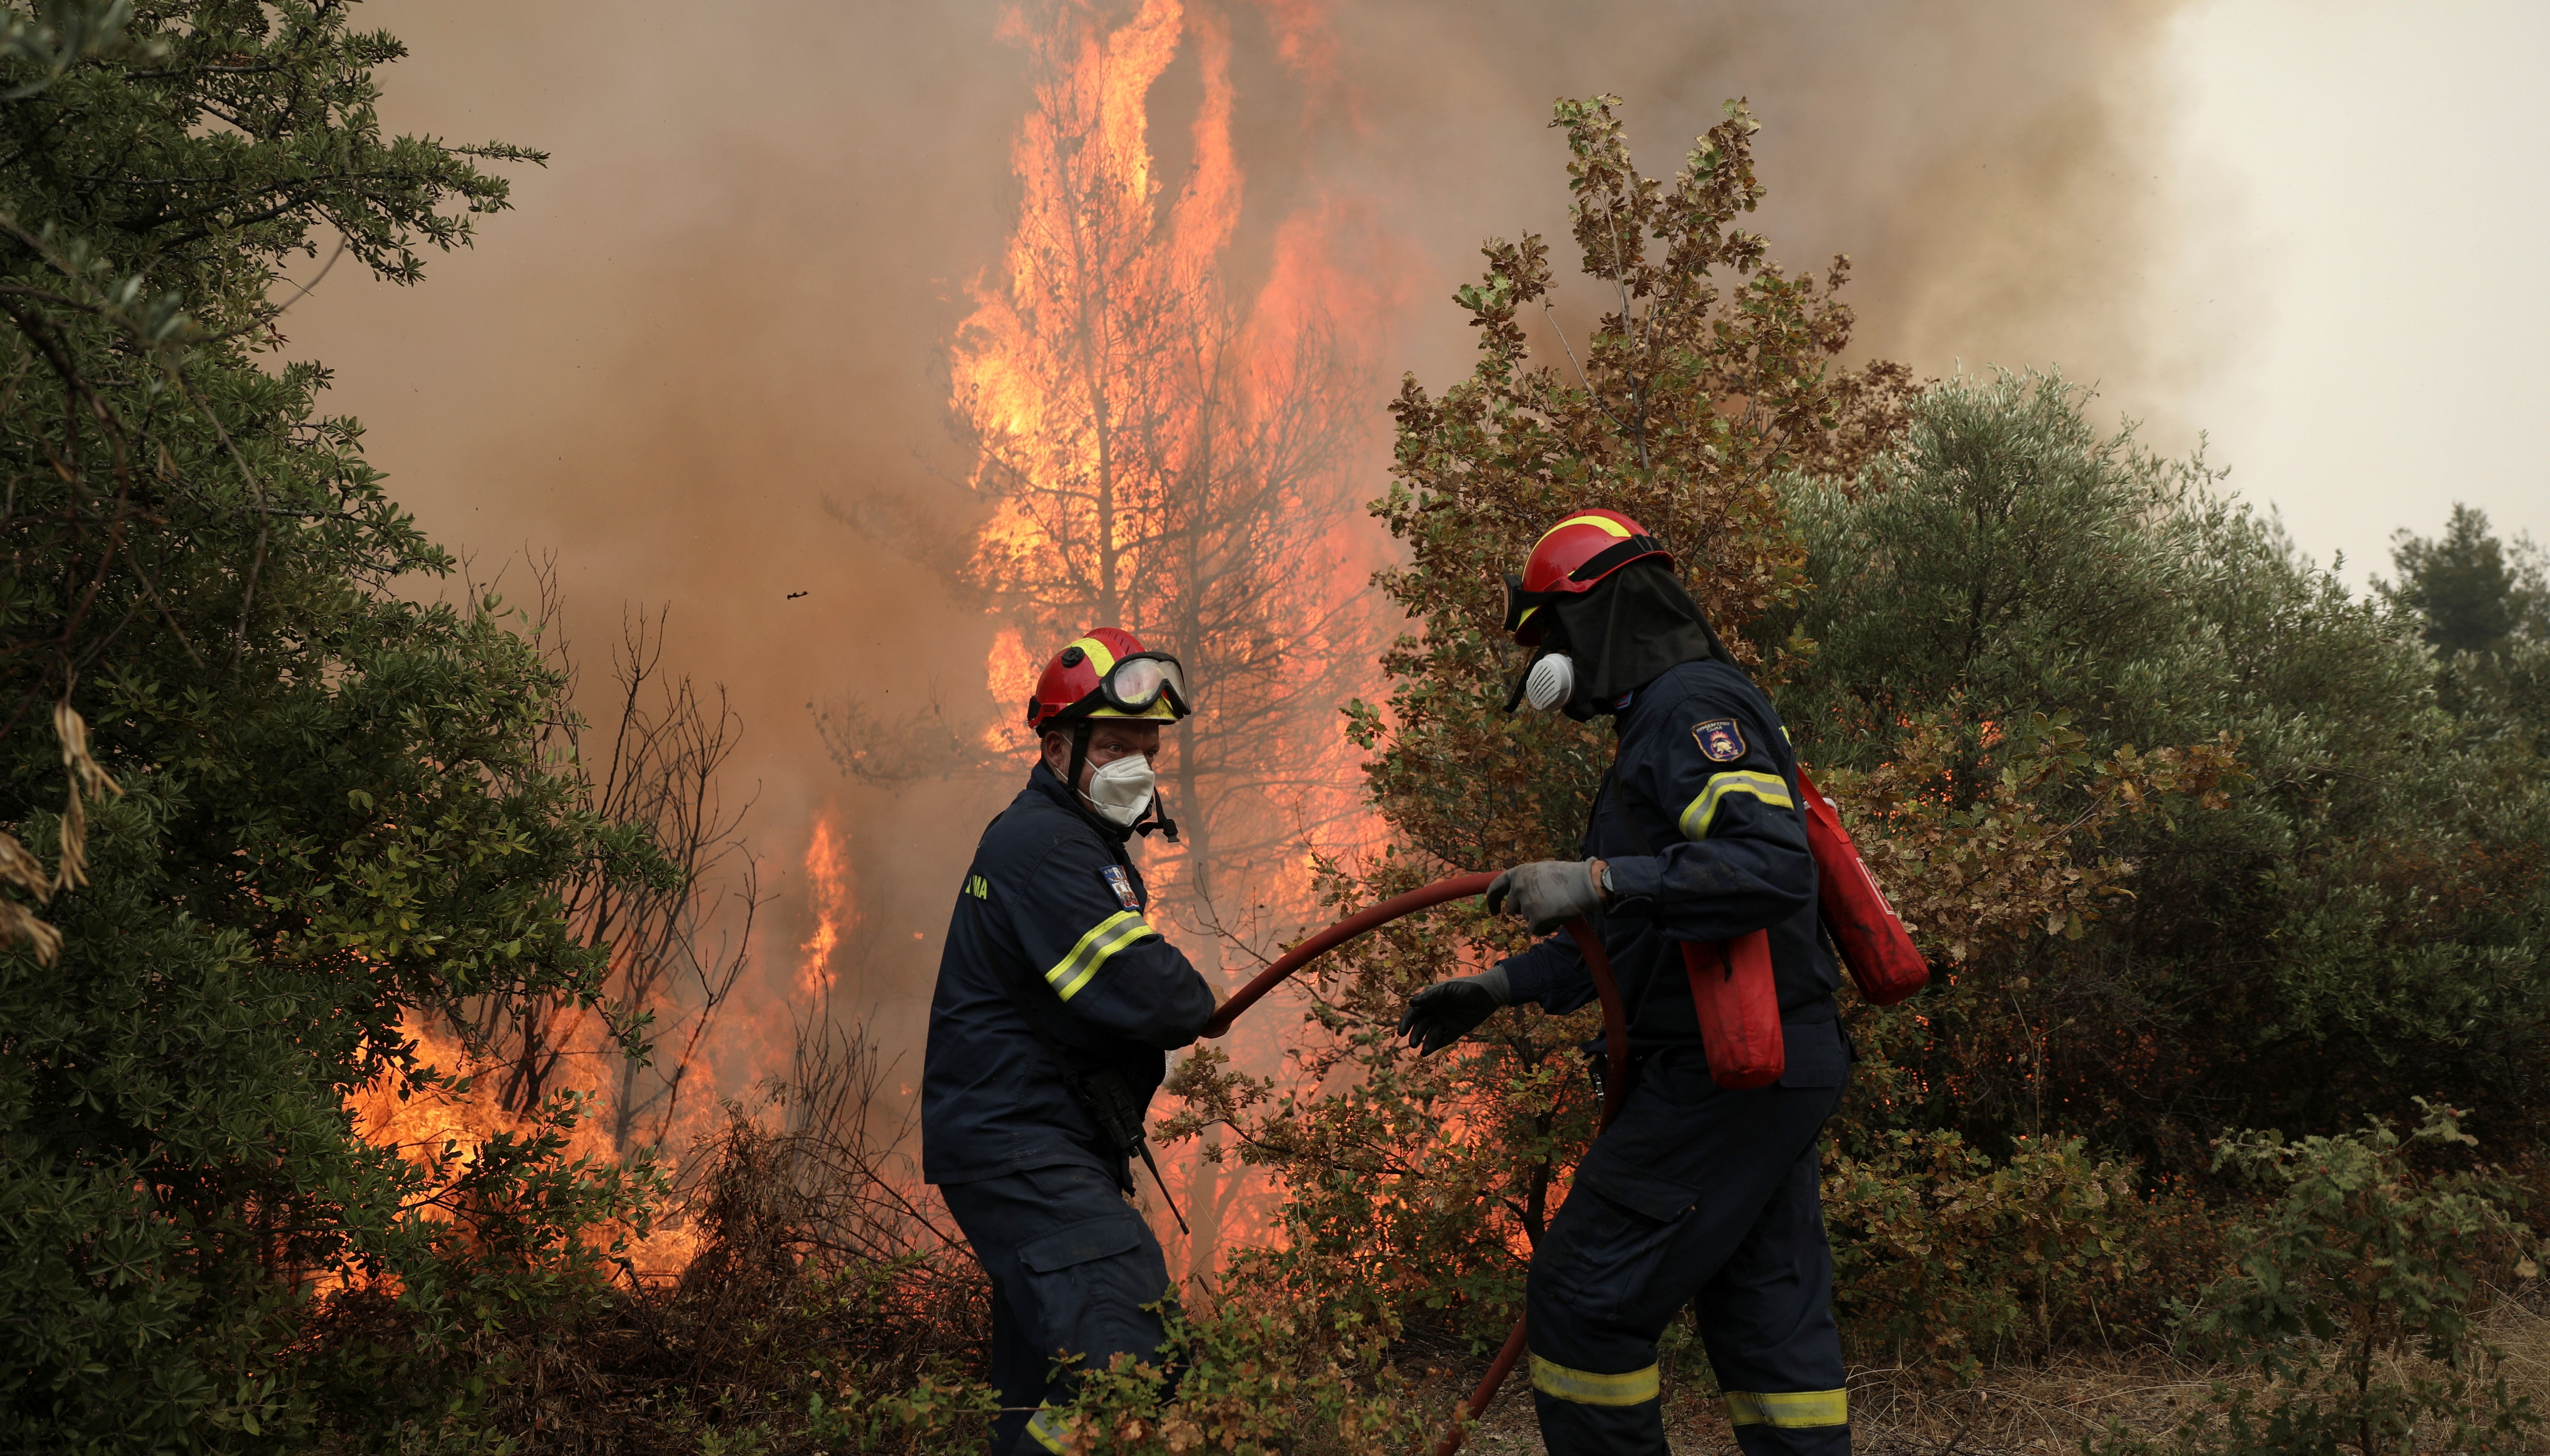 Firefighters try to extinguish a fire in the village of Avgaria, on the island of Evia, Greece